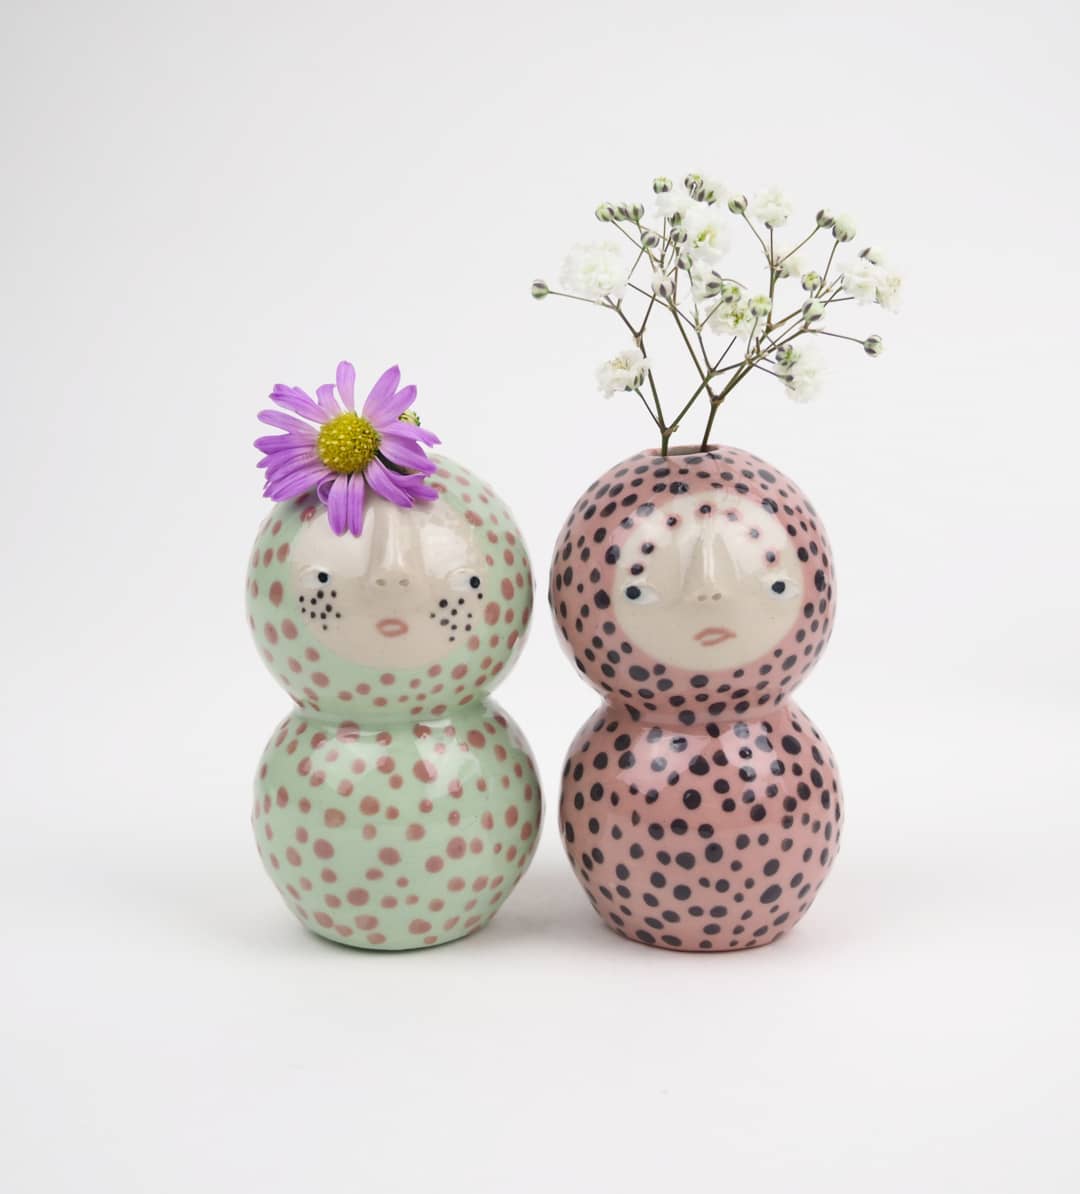 Lovely Porcelain Pieces Patterned With Quirky Cartoon Like Figures By Sandra Apperloo 9